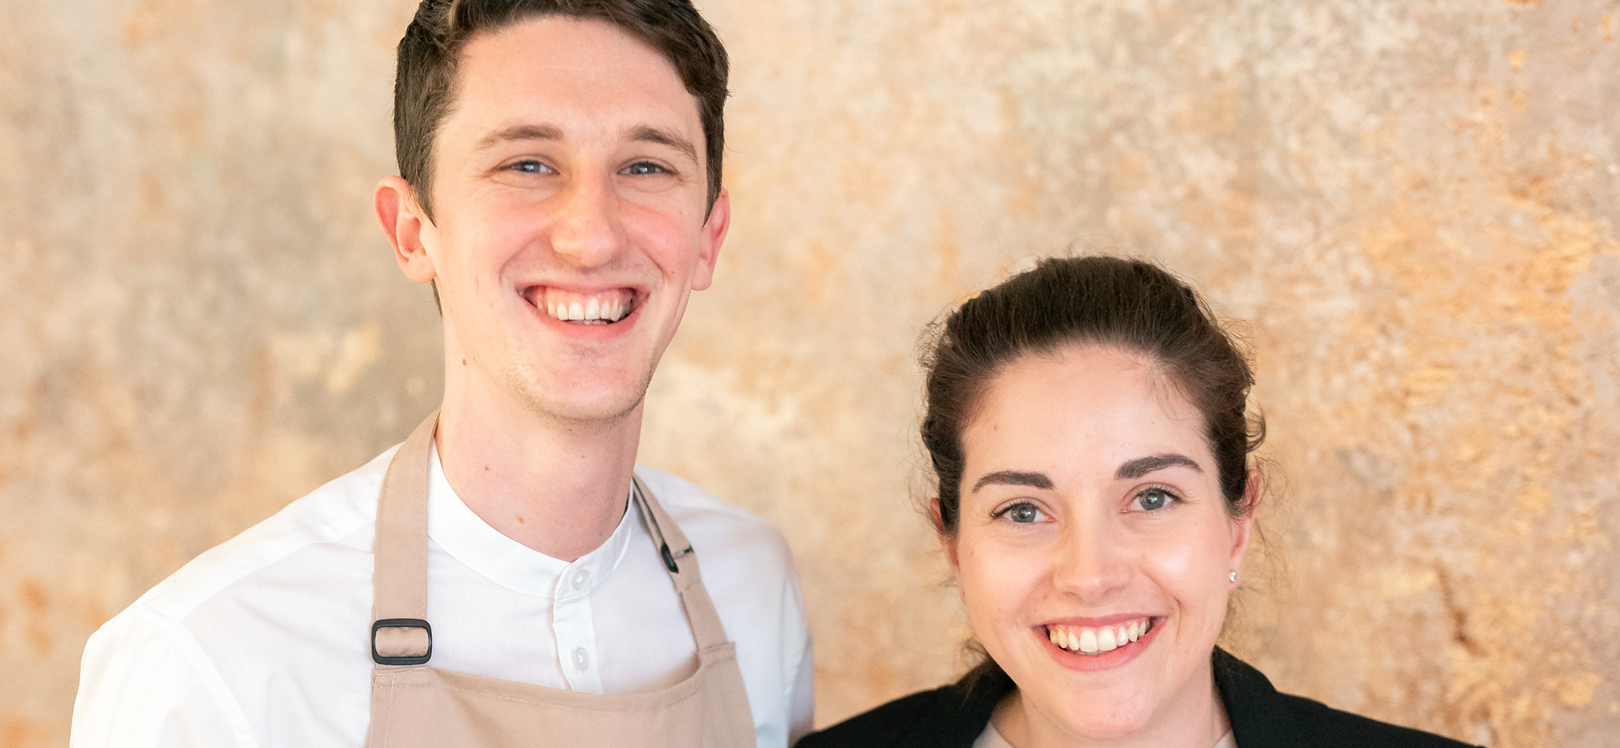 Owners of Faru restaurant Jake and Laura Siddle